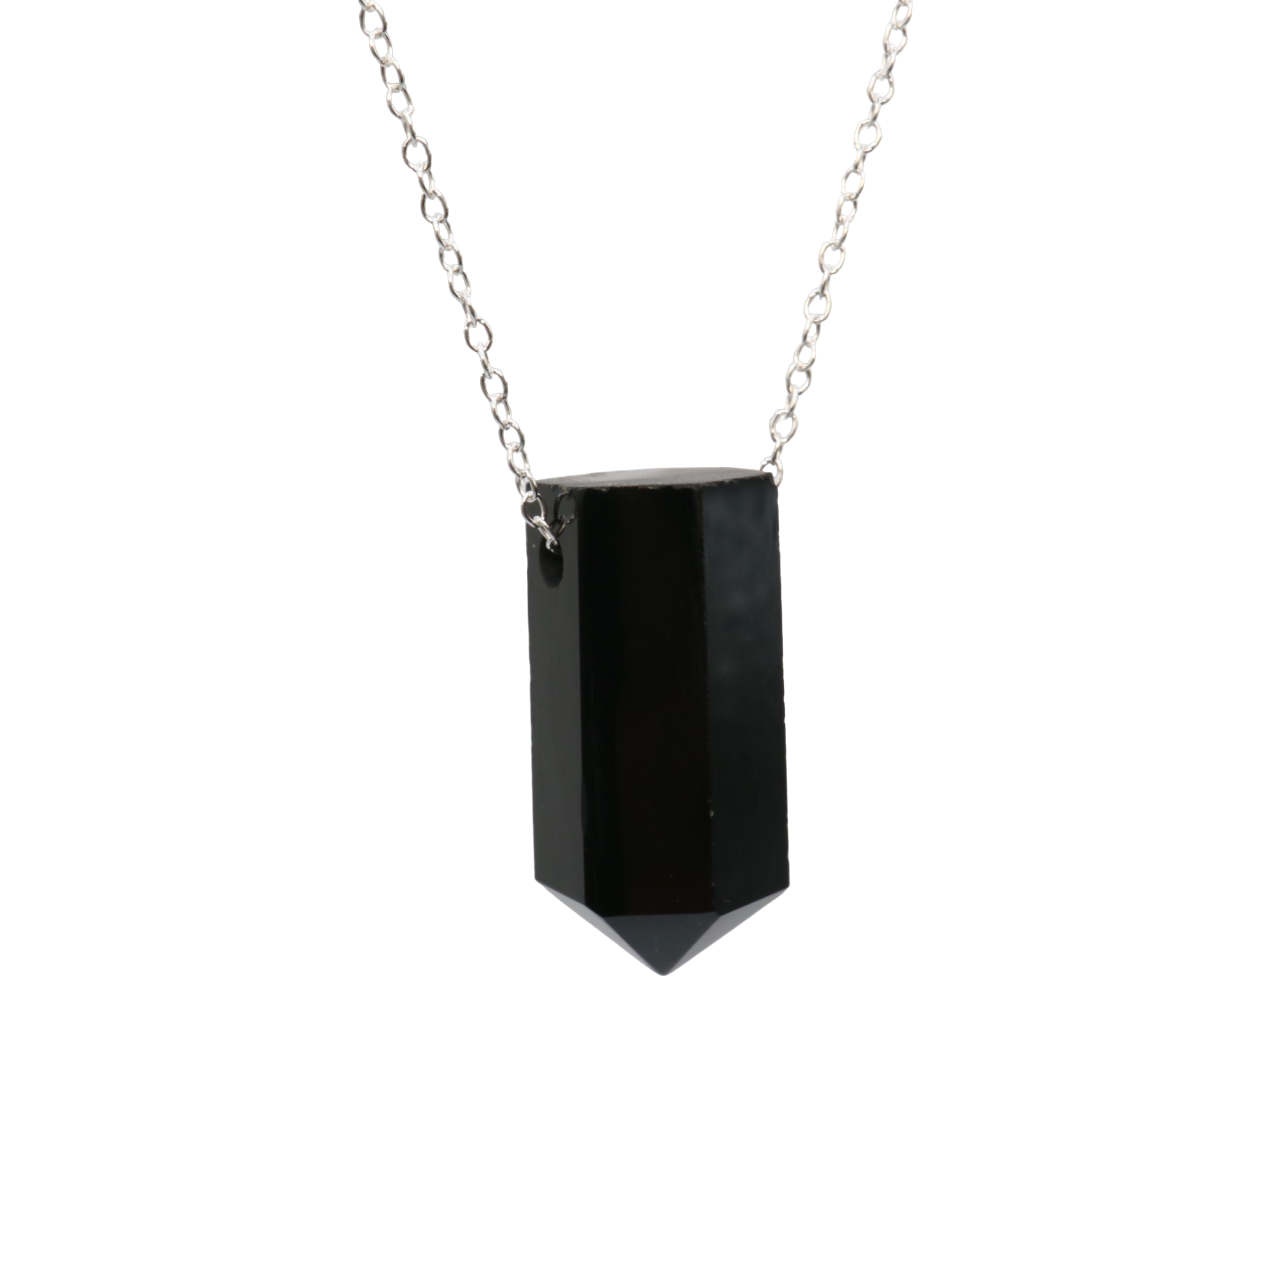 Black Onyx on a fine 925 Sterling Silver chain